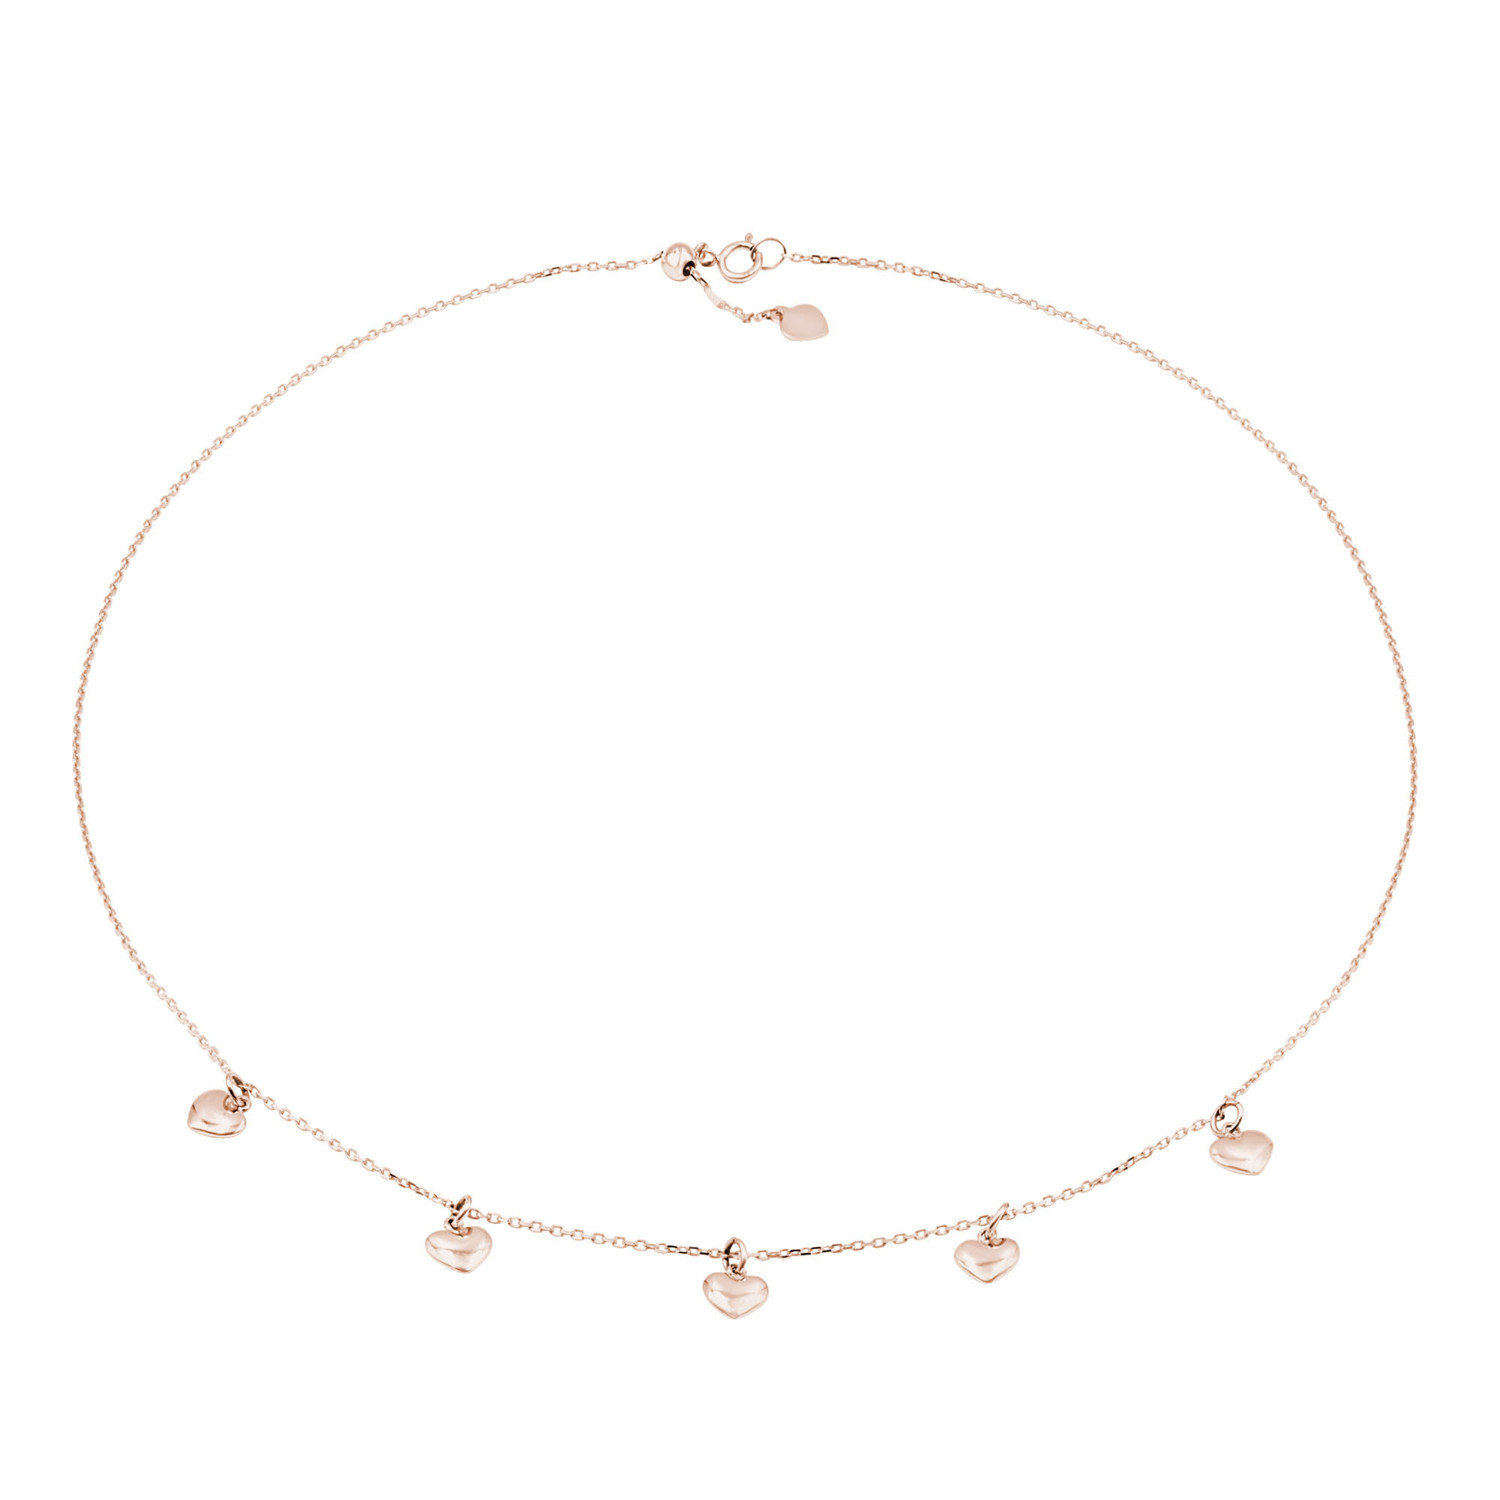 5 Heart Necklace in 14K Rose Gold (17" Chain) (MDR210183)